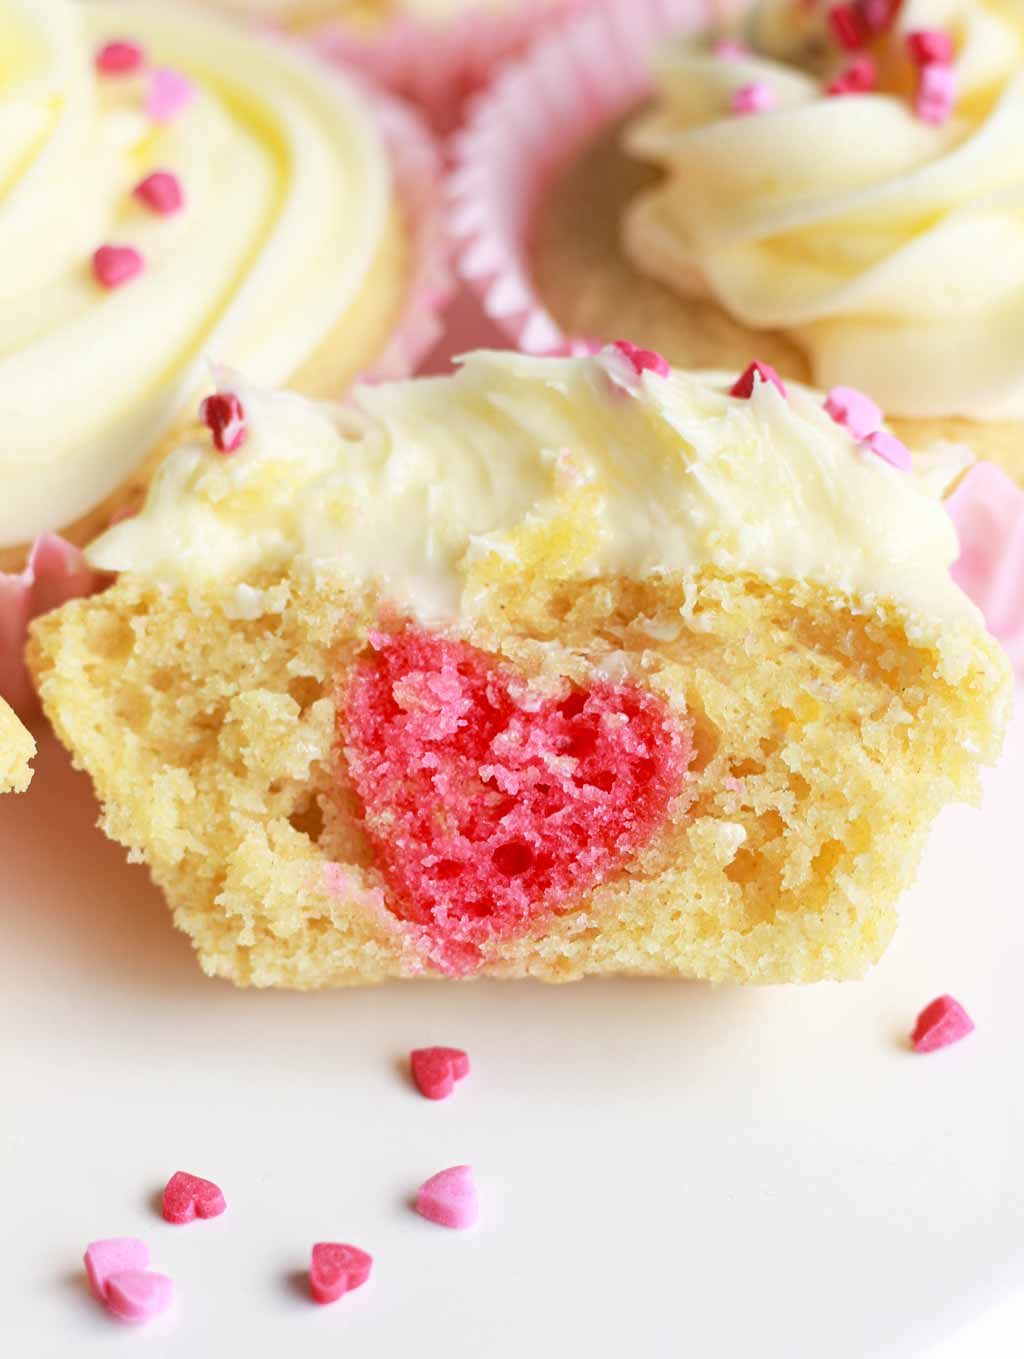 Pink Love Heart Showing Inside Of Cupcakes